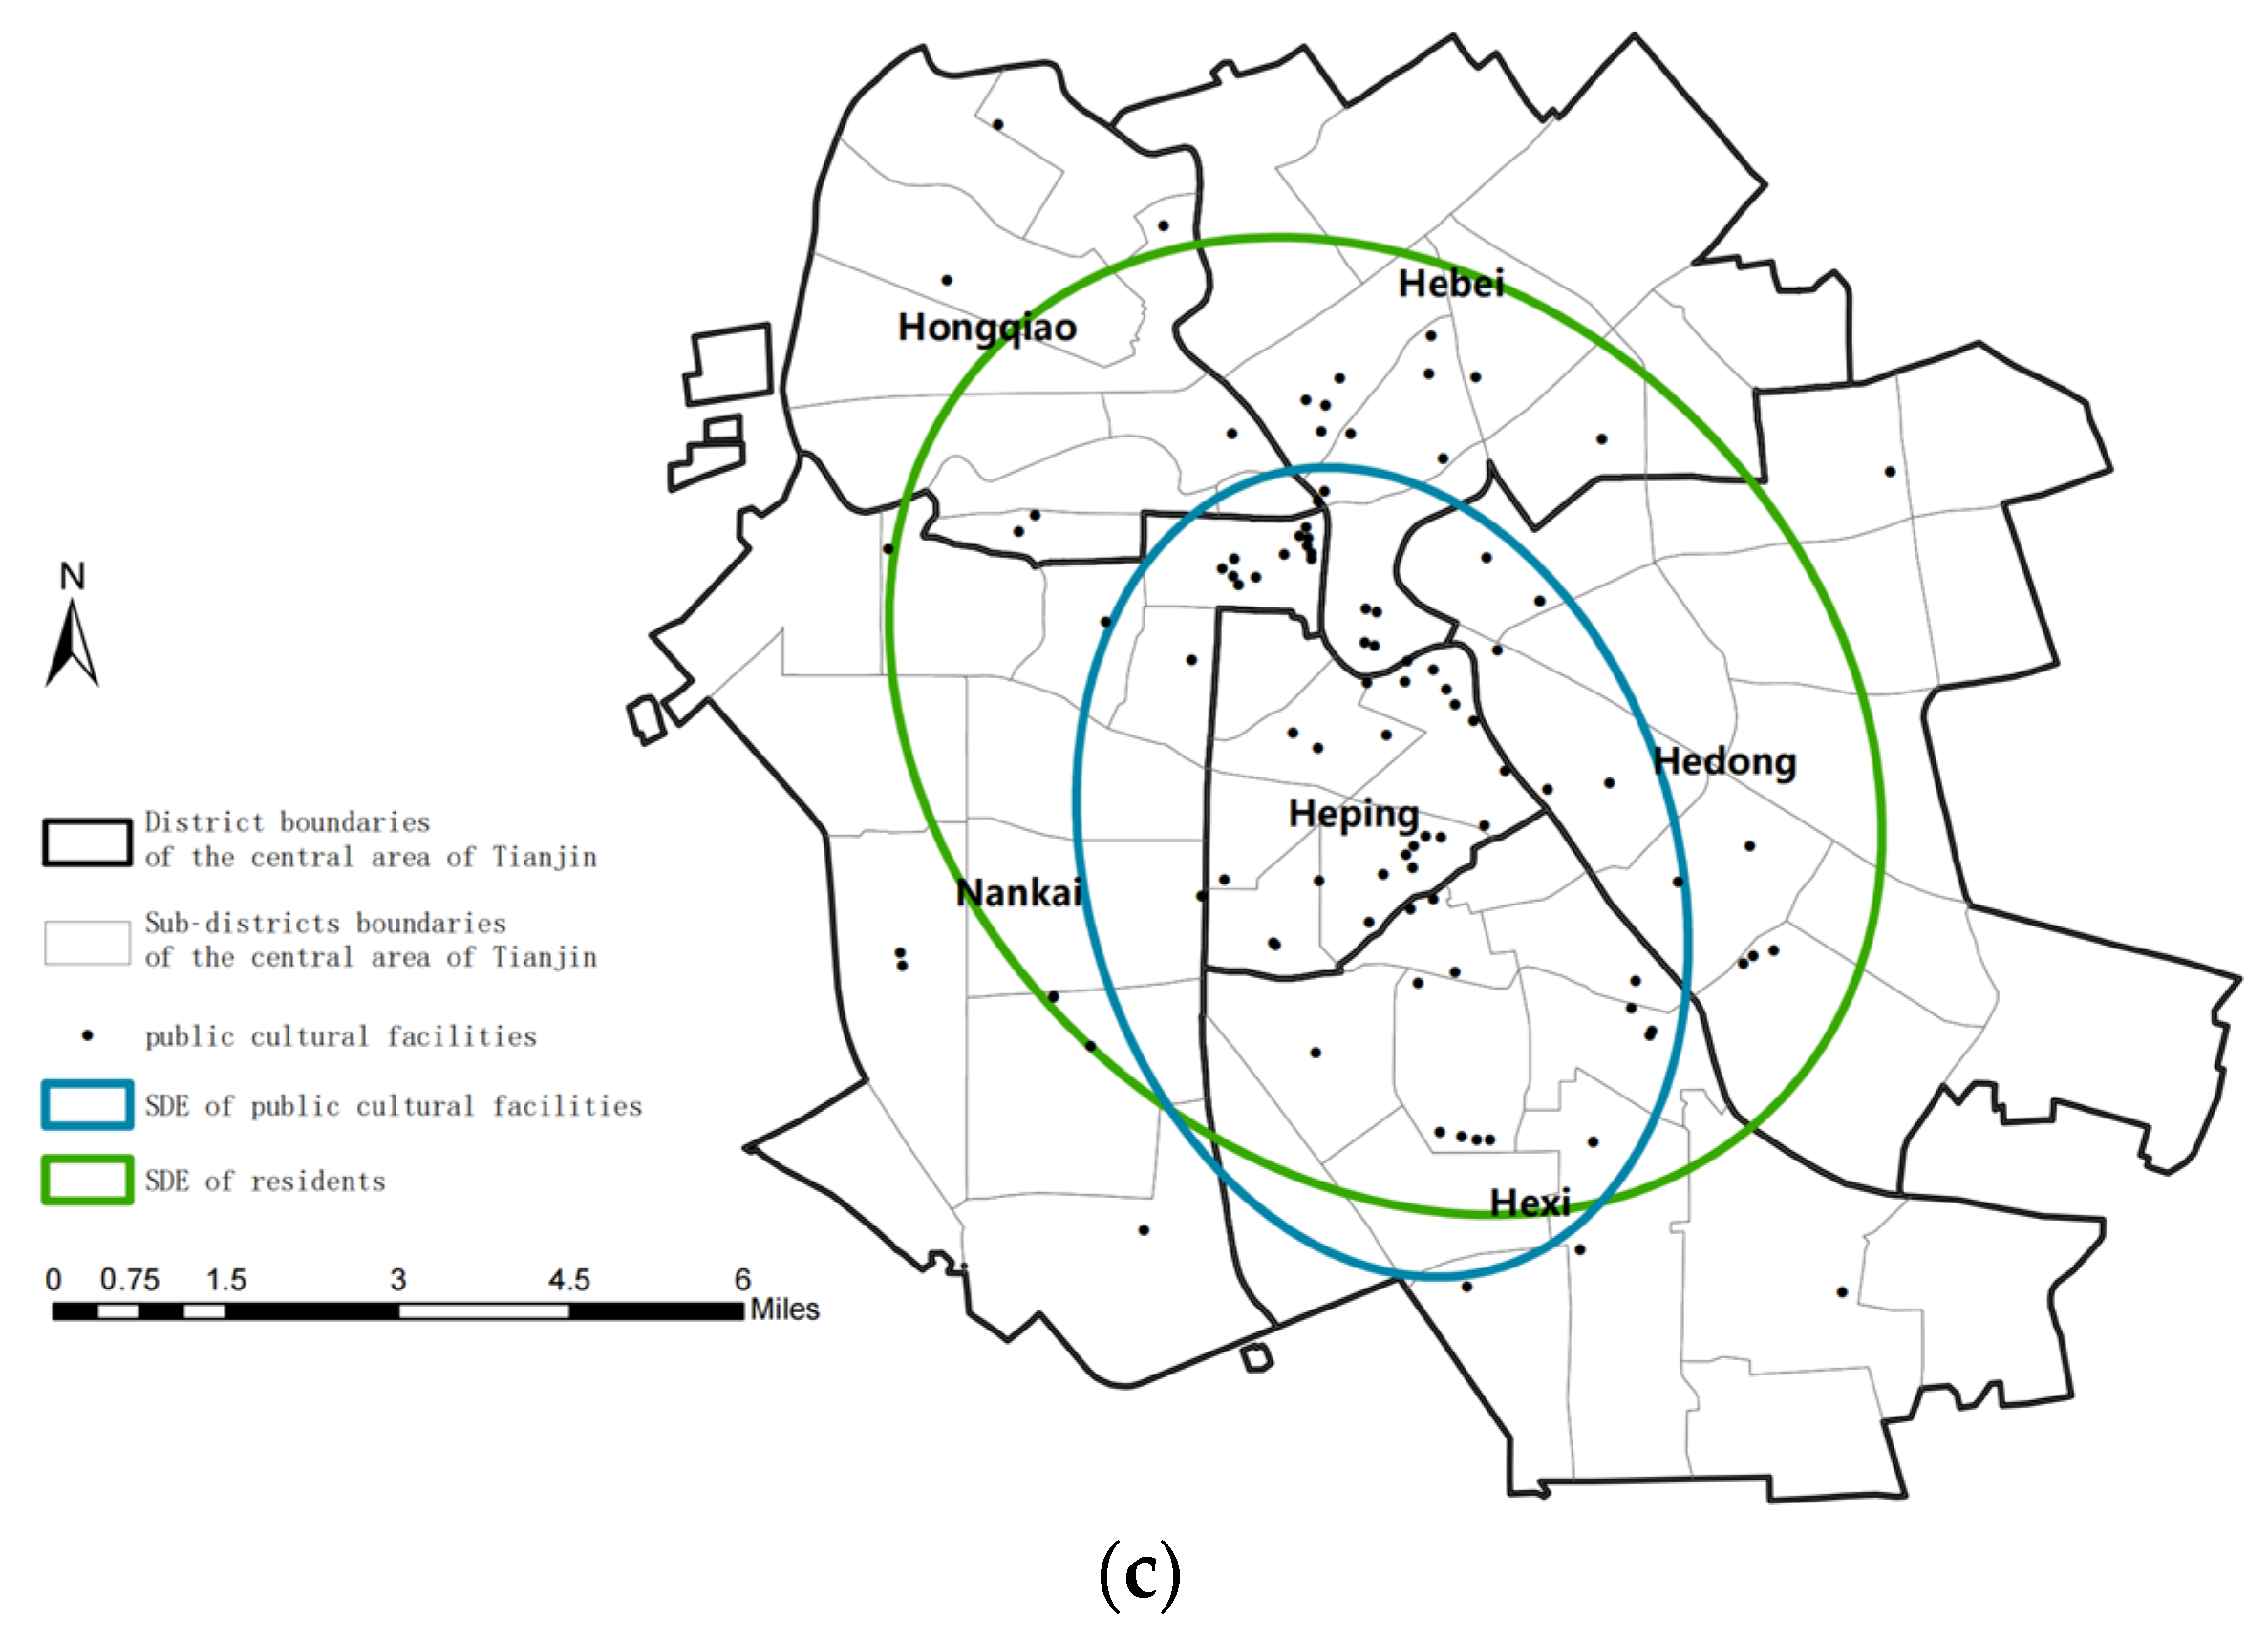 Sustainability | Free Full-Text | Equalization Measurement and Optimization  of the Public Cultural Facilities Distribution in Tianjin Central Area